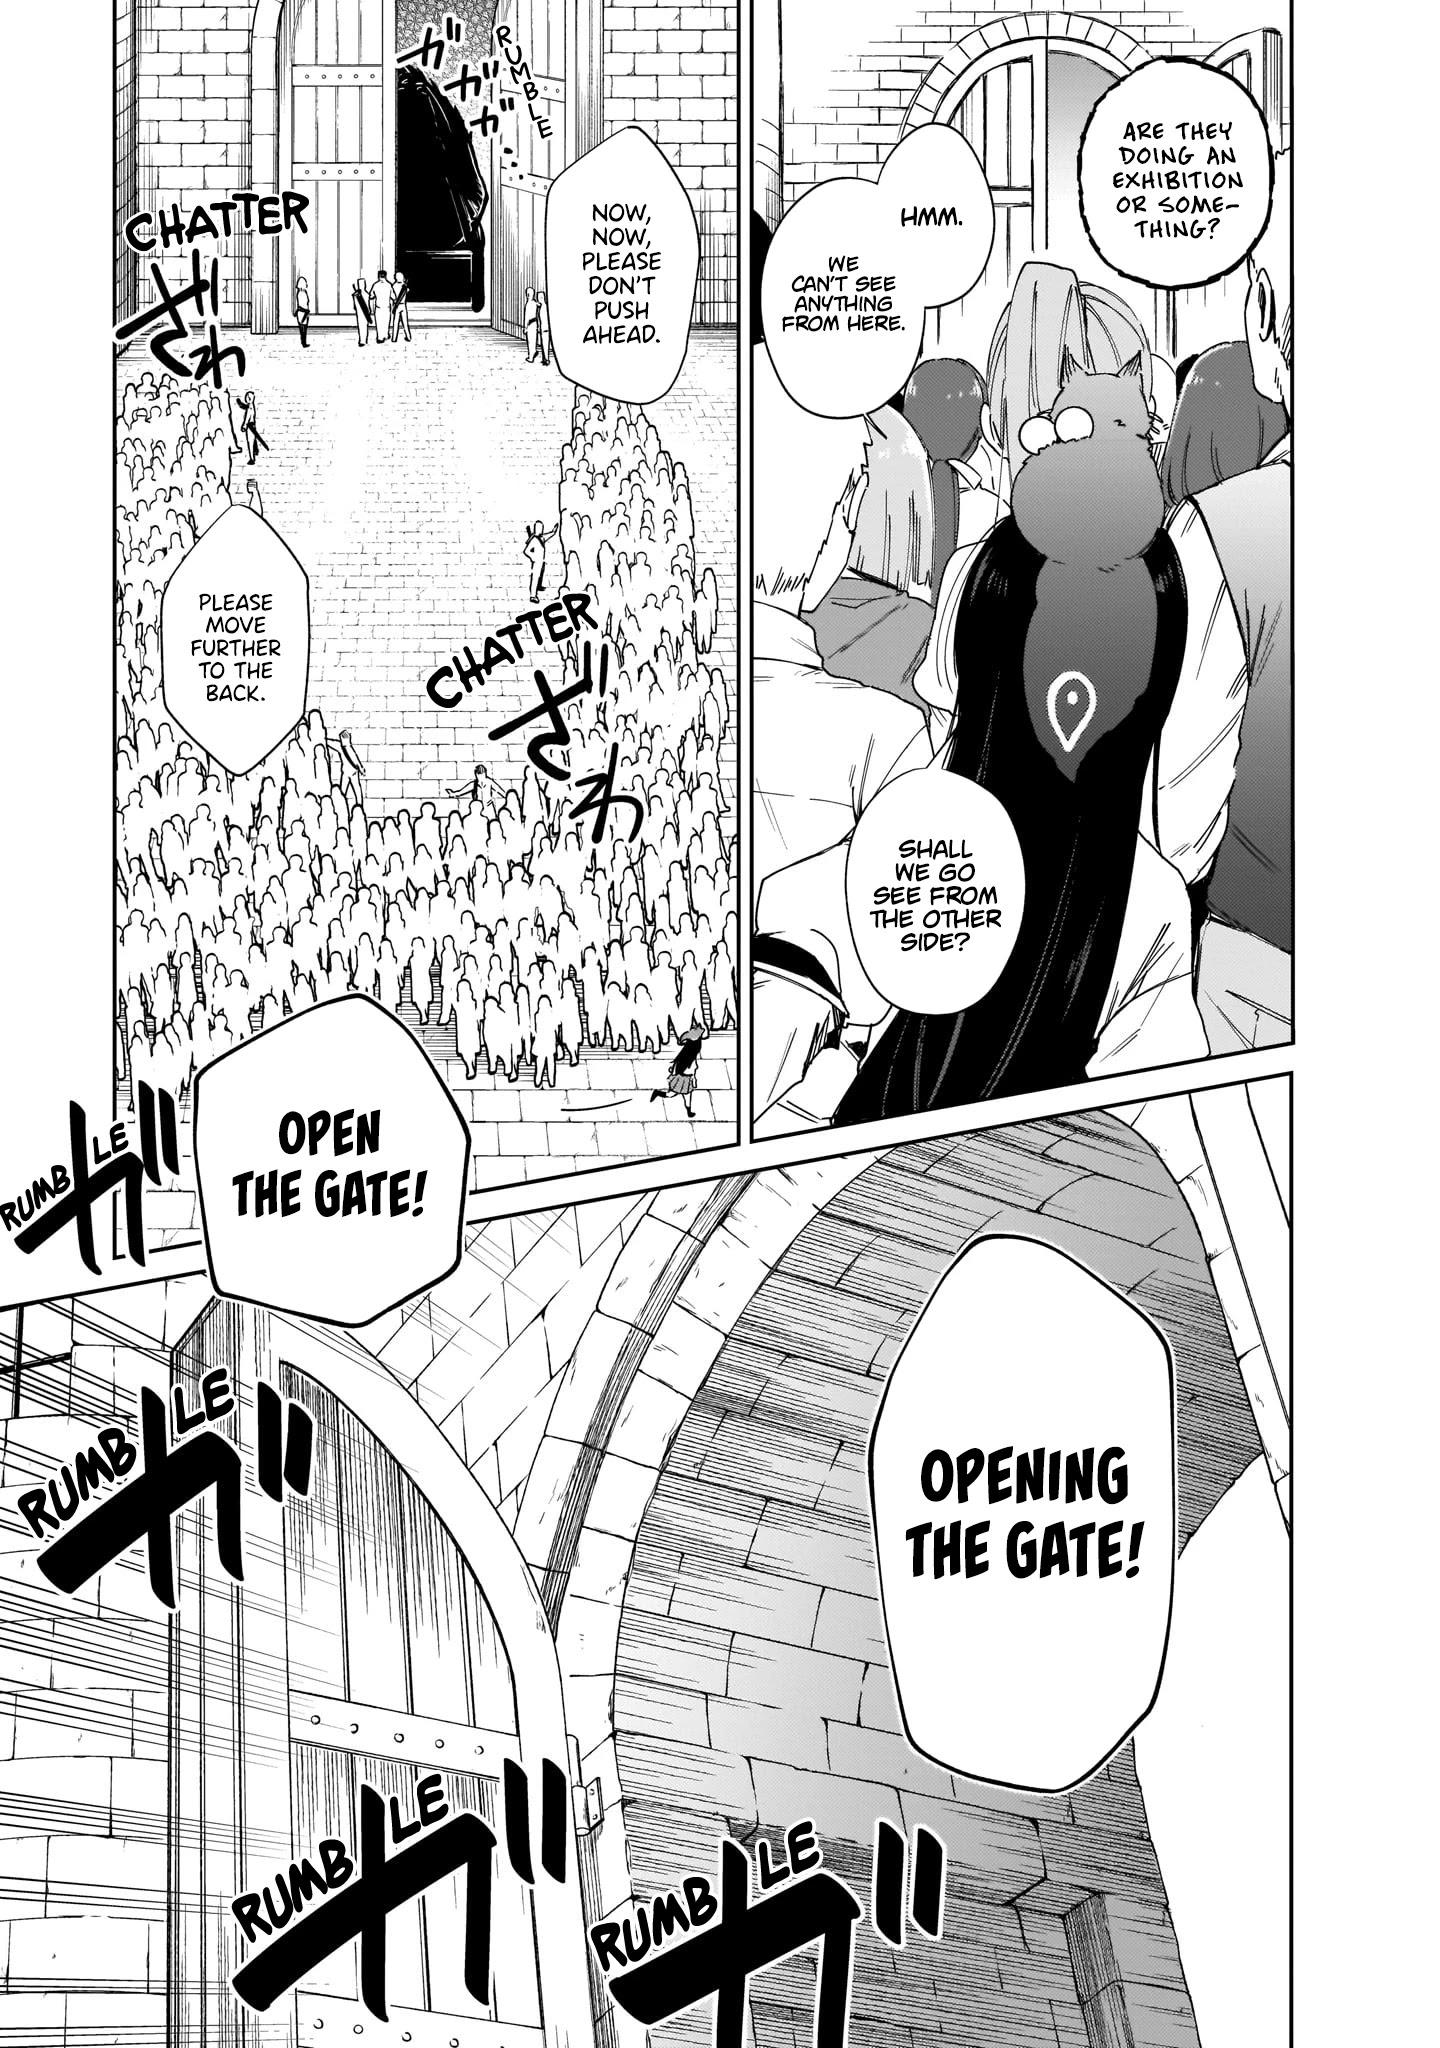 DISC] Saint? No, Just a Passing Monster Tamer! - Chapter 7 : r/manga